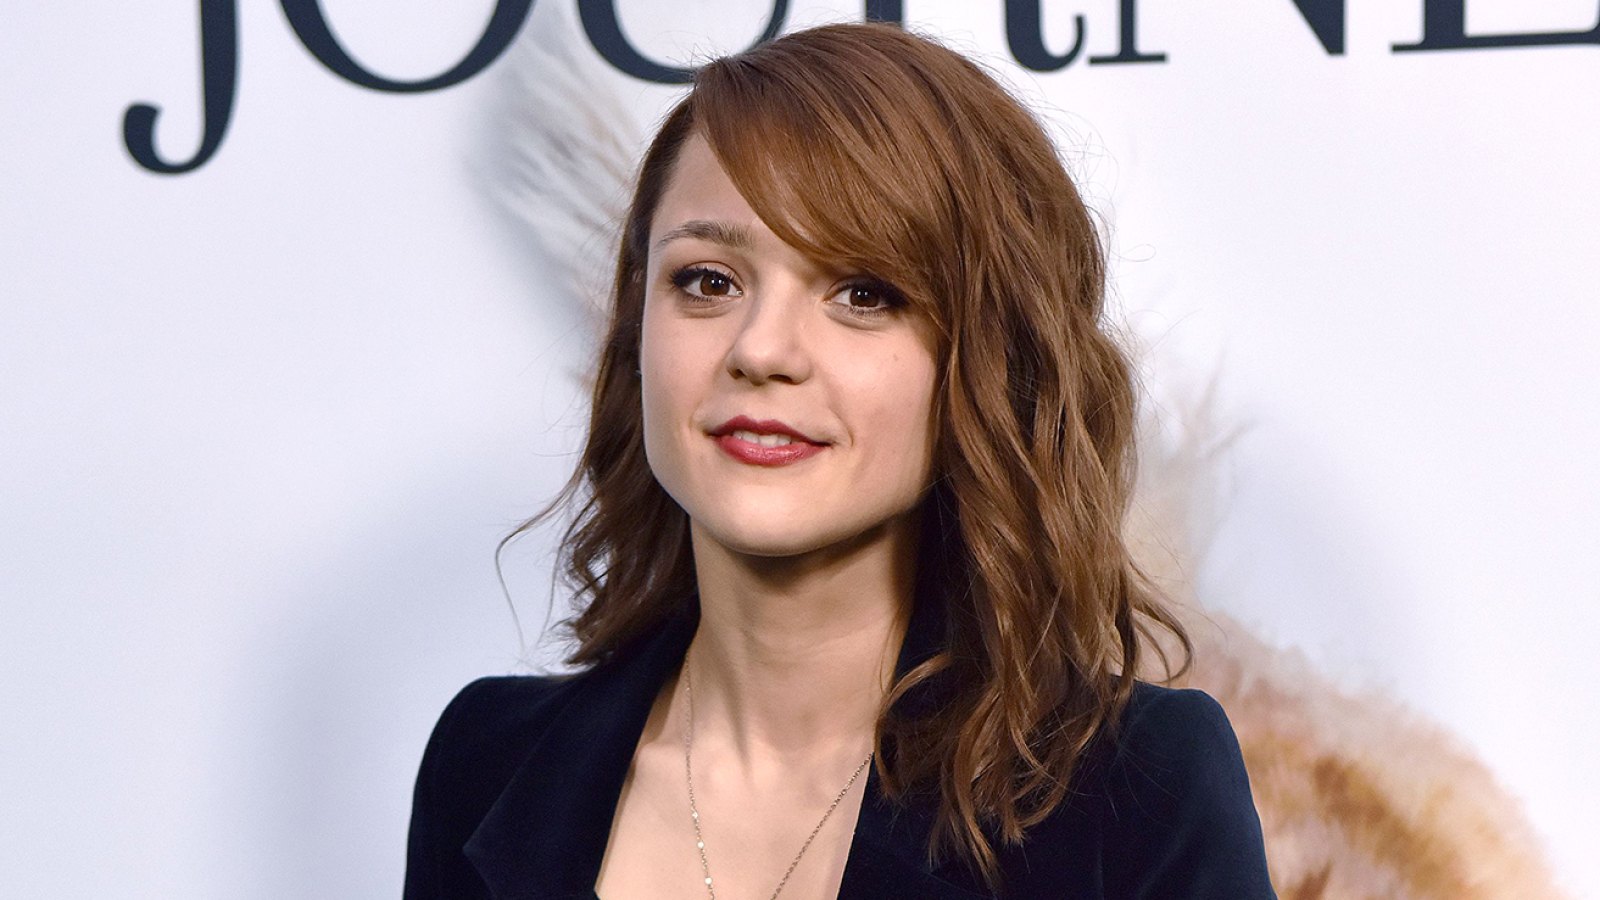 Finding Carter’s Kathryn Prescott in ICU After Being Hit by a Cement Truck While Crossing the Street